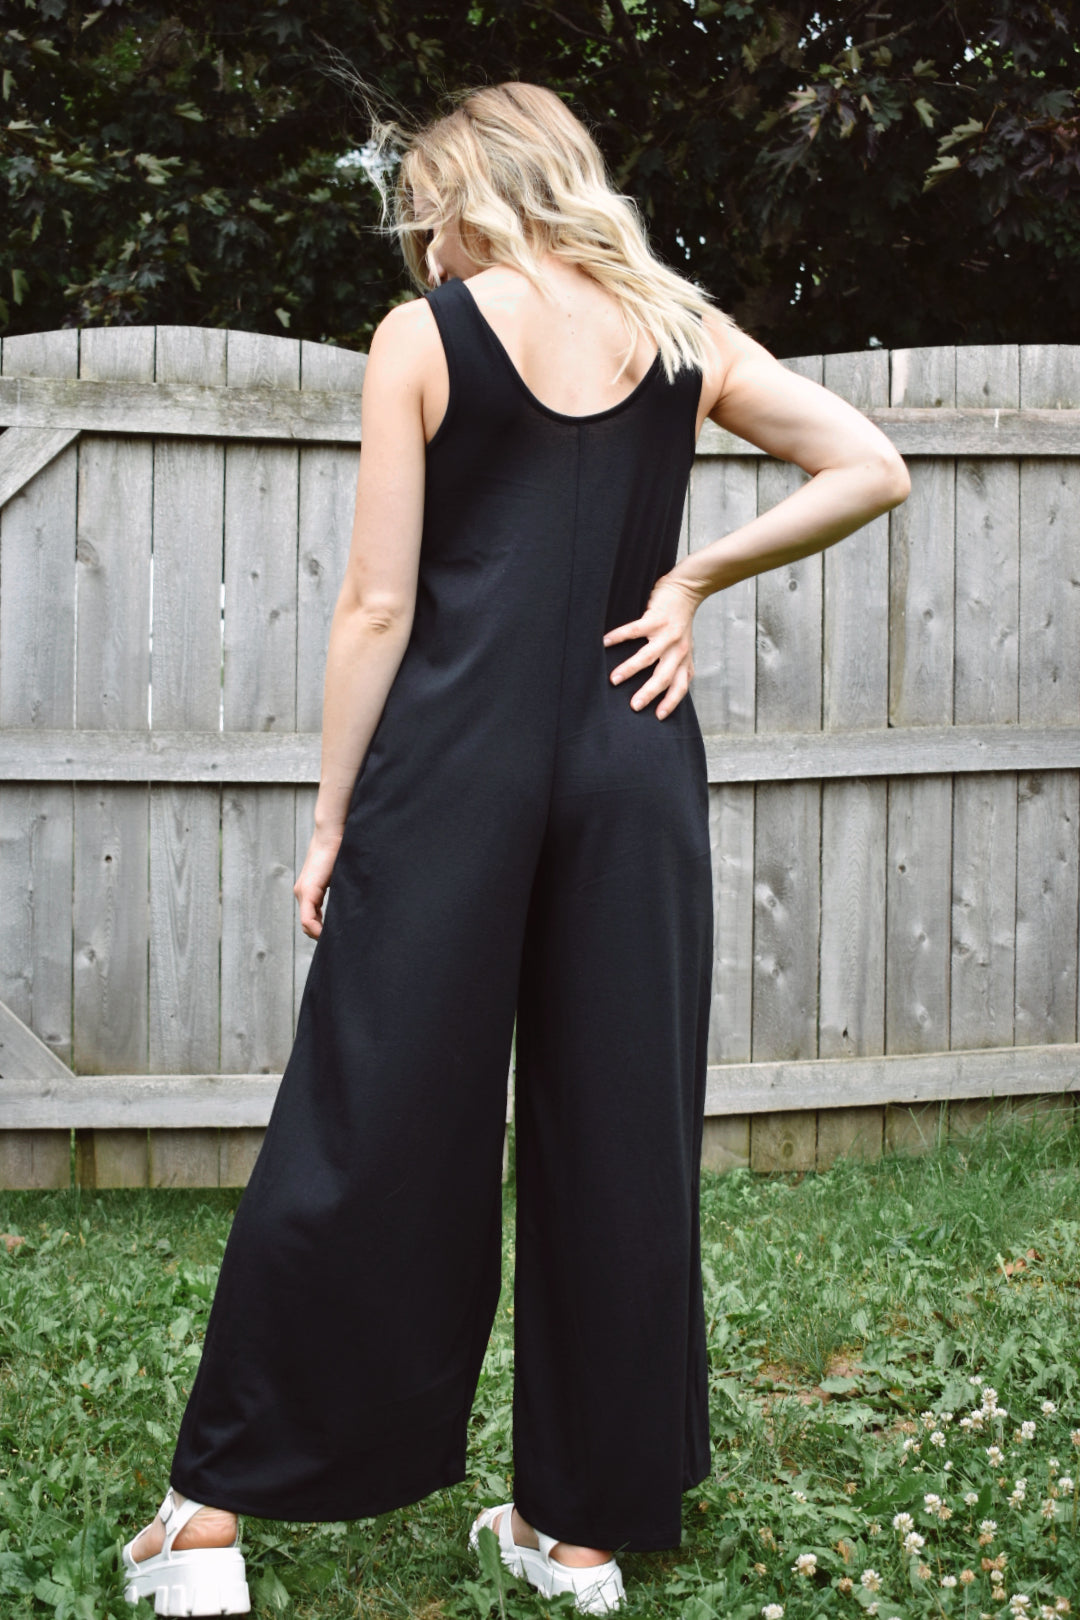 scoop neck tank jumpsuit in black with wide legs and pockets. Made with french terry knit fabric and is loose fitting. The brand is Mittoshop.